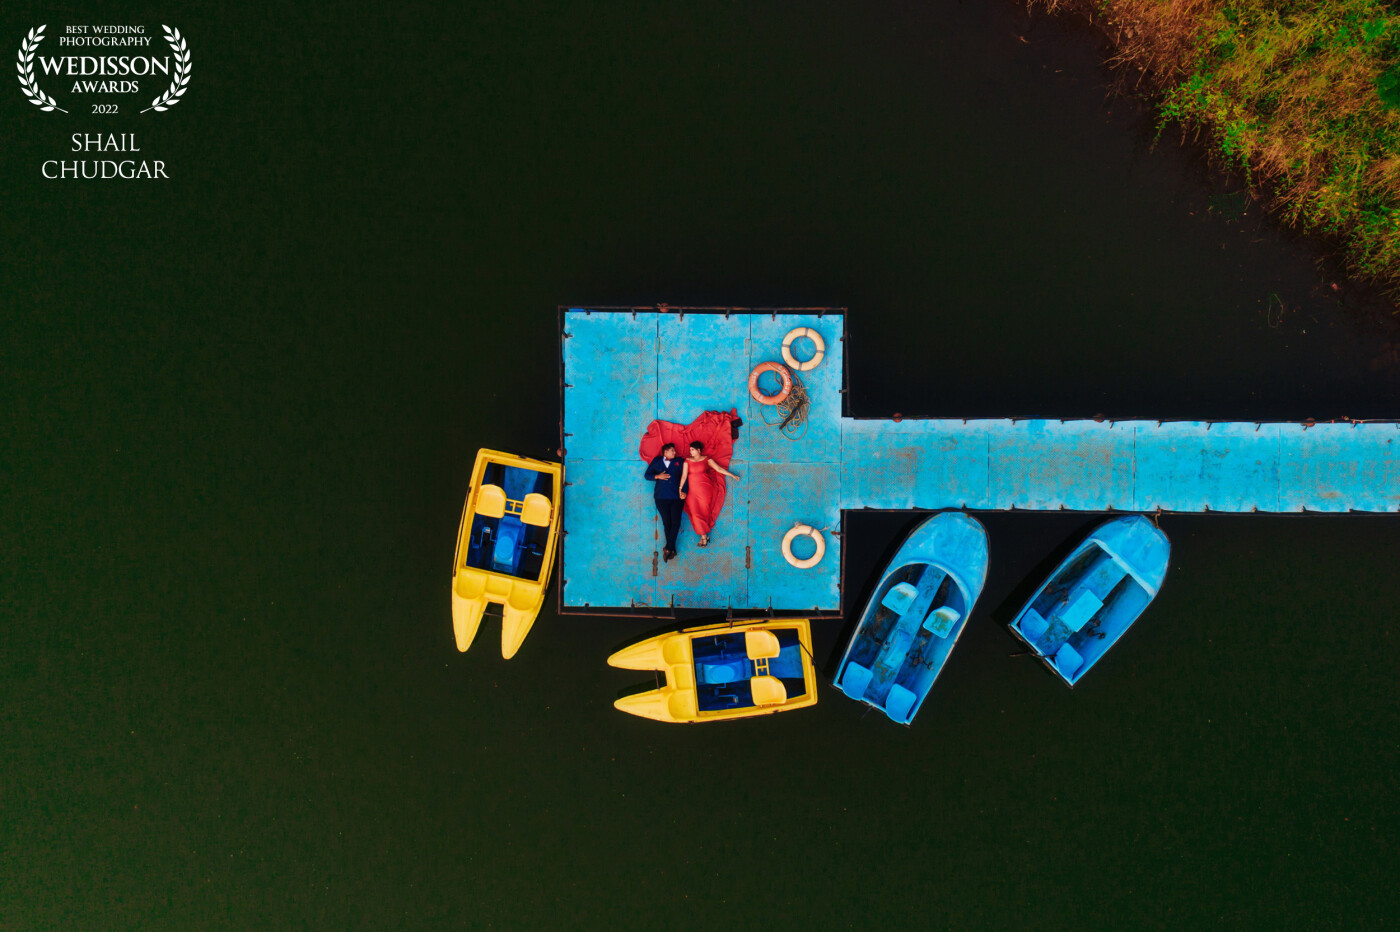 This was a beautiful location we were at and the contrast between the outfits of the couple and the boat dock and the colourfull boats was too perfect! Had to take a drone shot for this one!